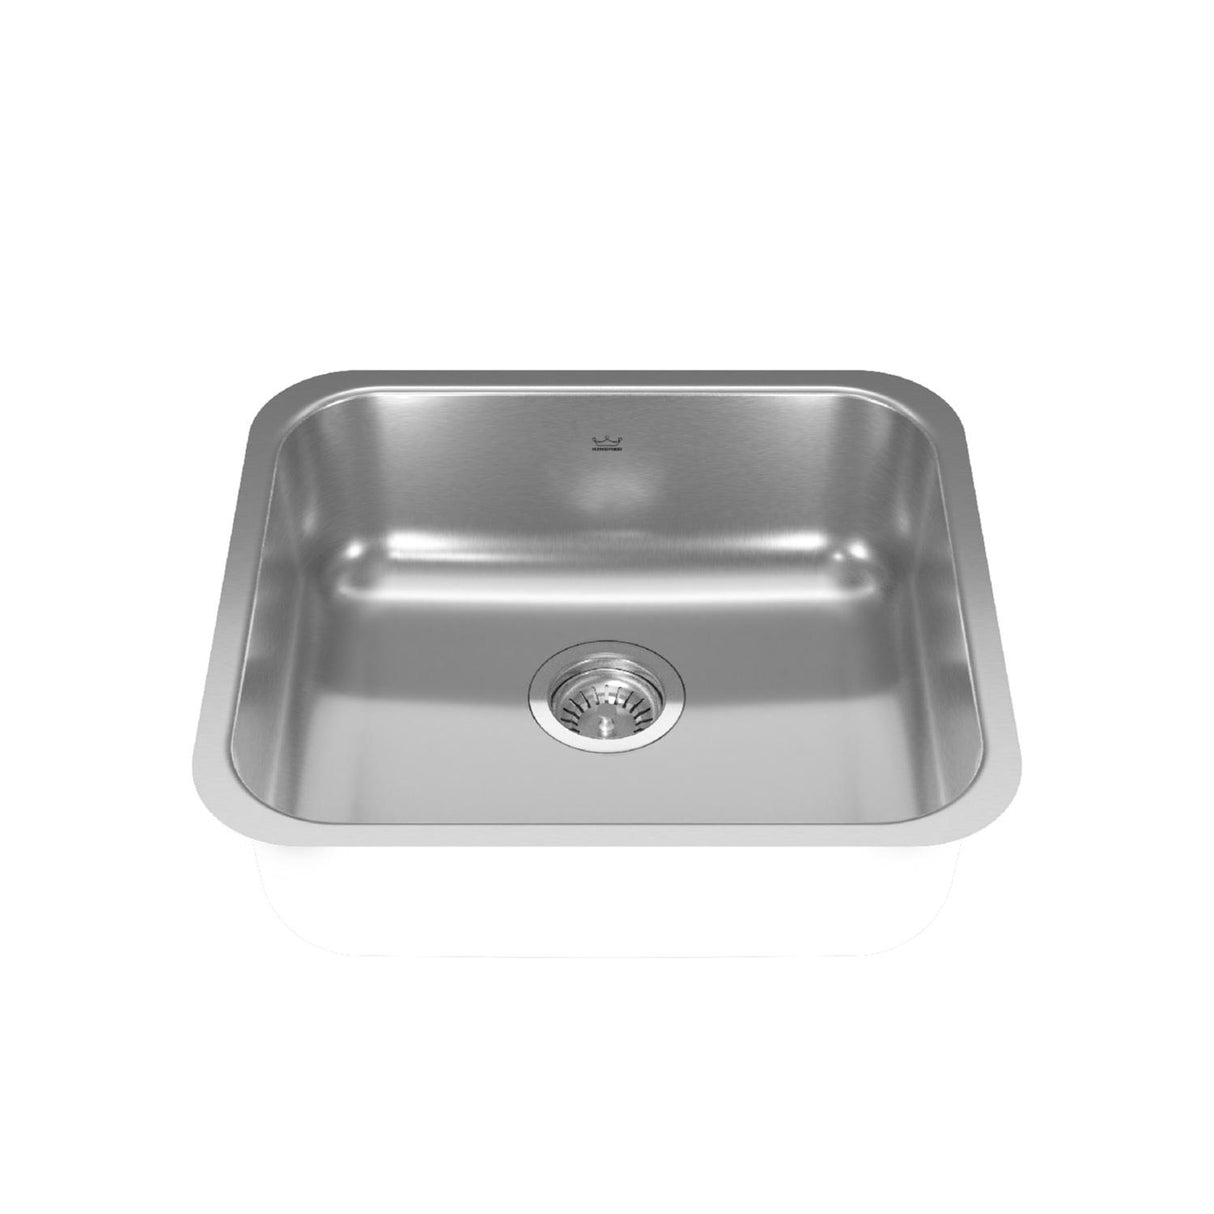 KINDRED RSU1820-7N Reginox 19.75-in LR x 17.75-in FB x 7-in DP Undermount Single Bowl Stainless Steel Kitchen Sink In Linear brushed Bowl with Silk Finished Rim